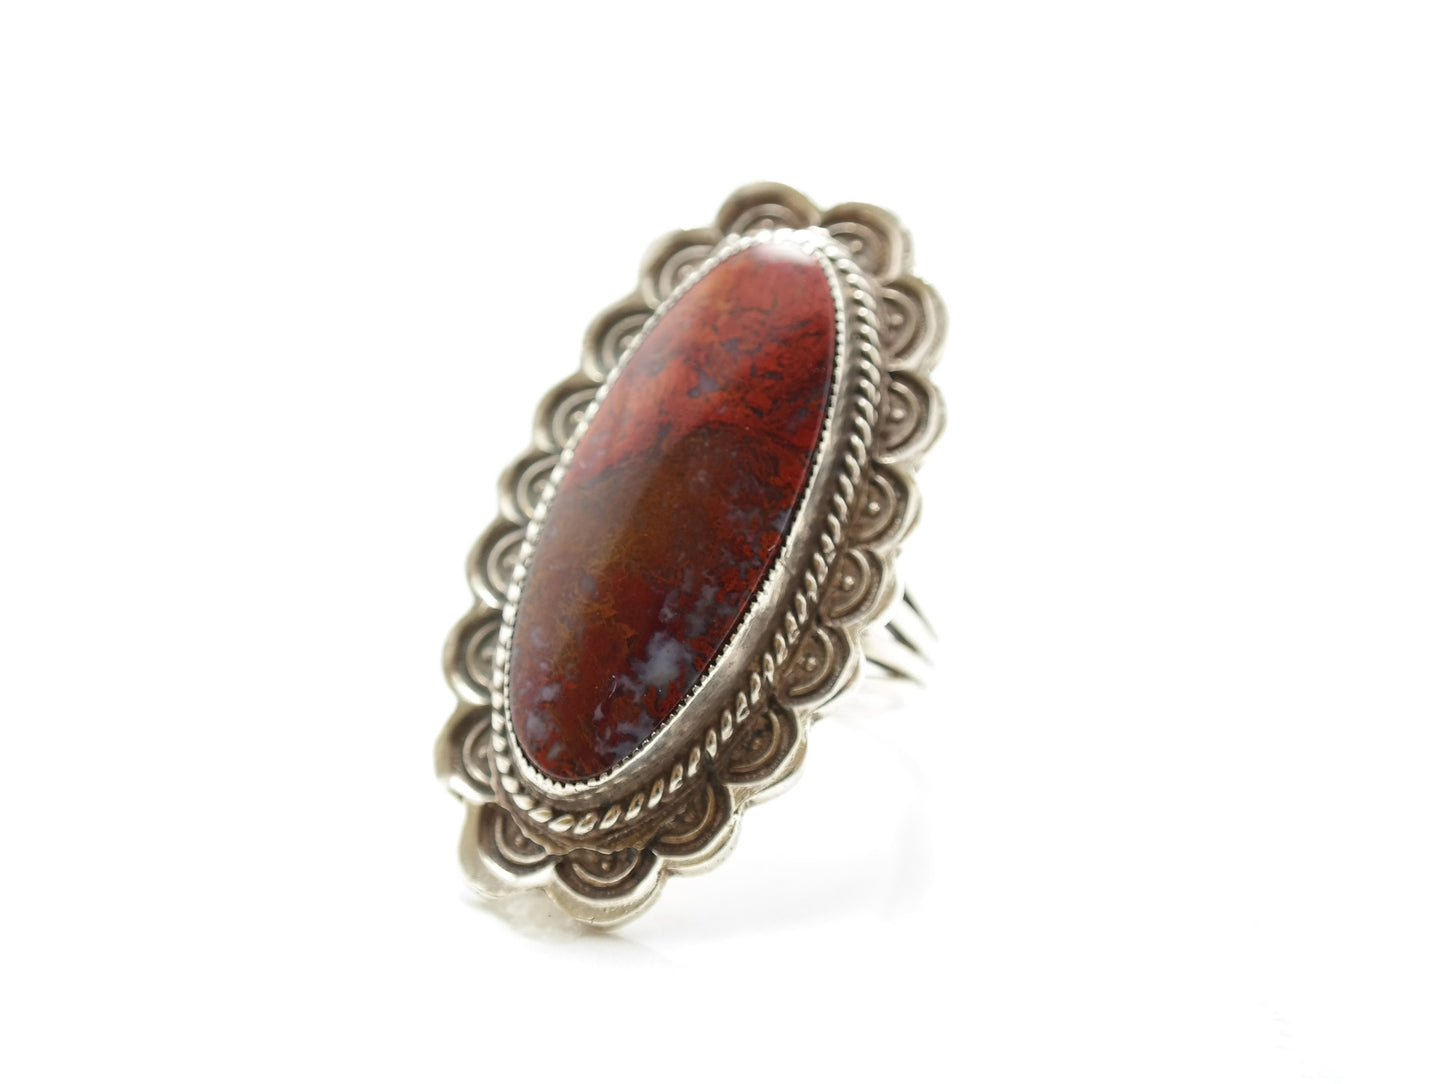 Vintage Native American Agate Ring Sterling Silver Scallop Size 8 1/4